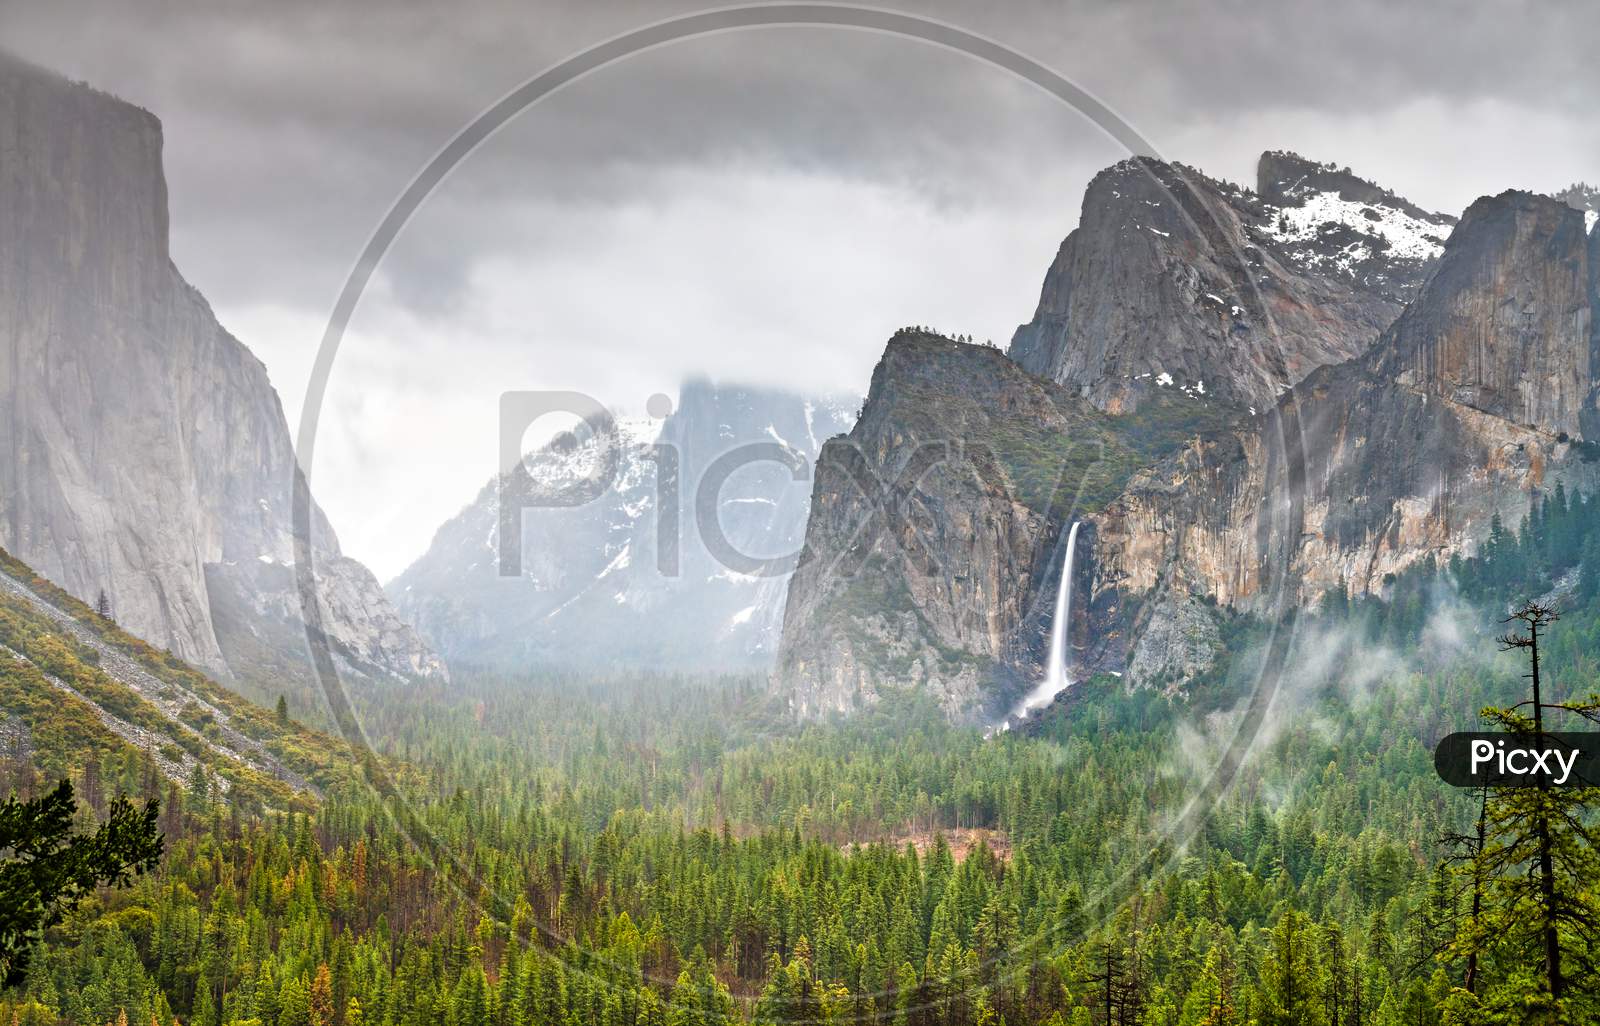 Iconic View Of Yosemite Valley In California